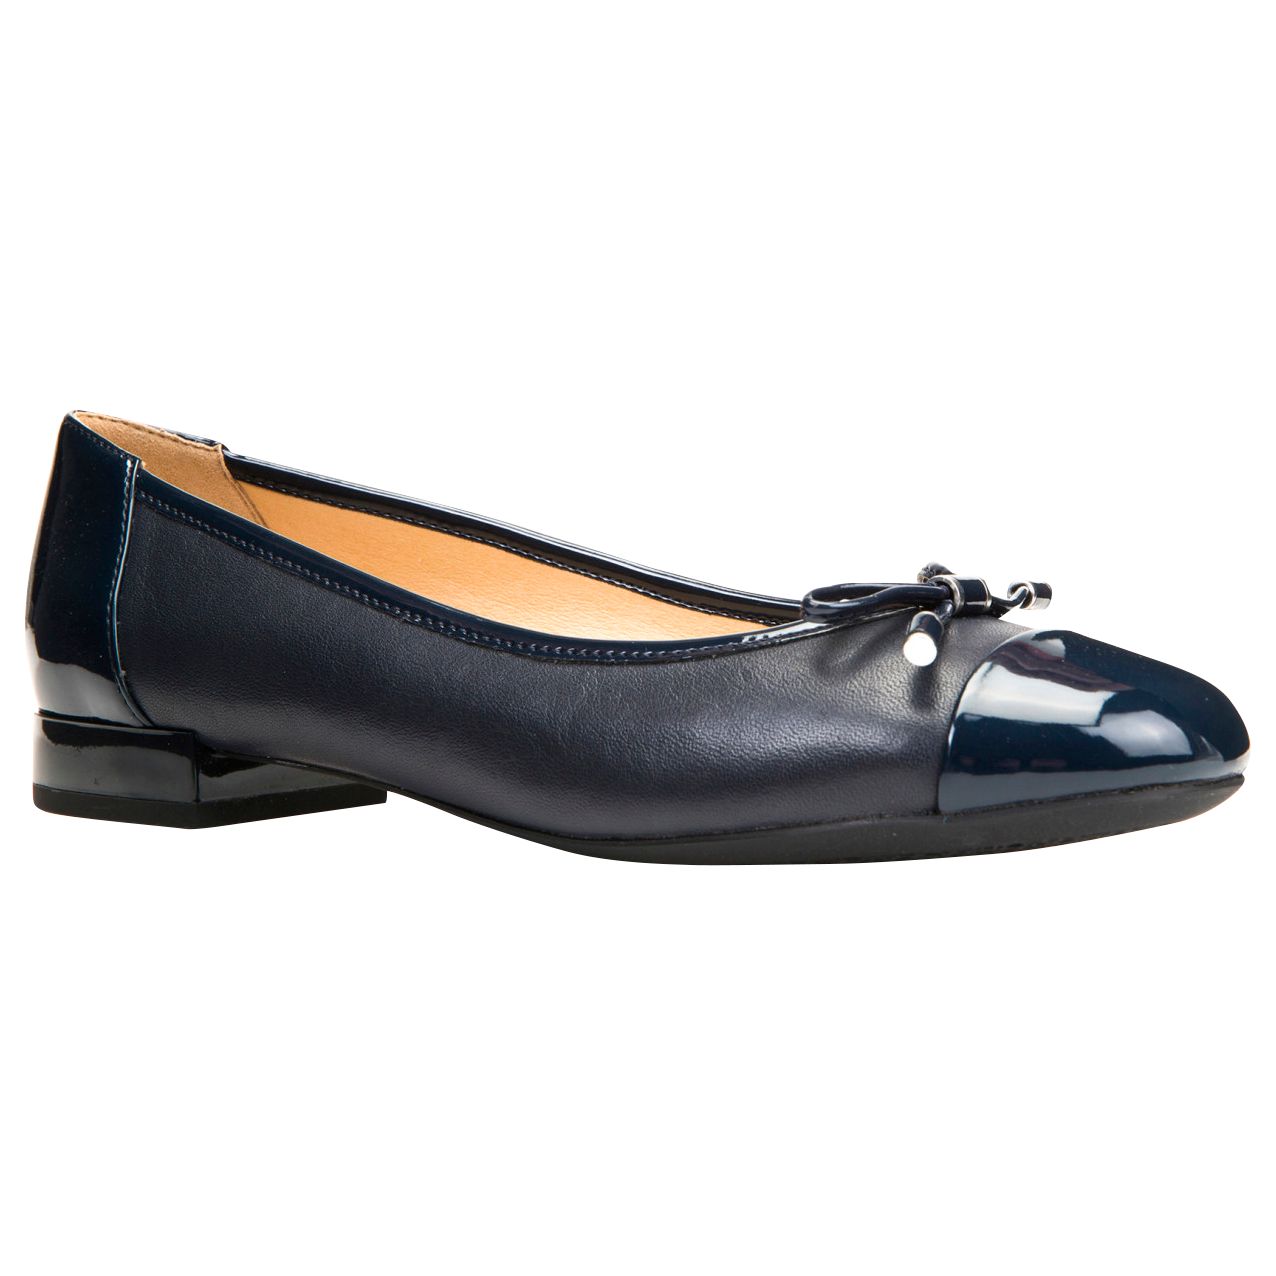 Geox Women's Wistrey Breathable Ballet Pumps, Navy Leather, 3